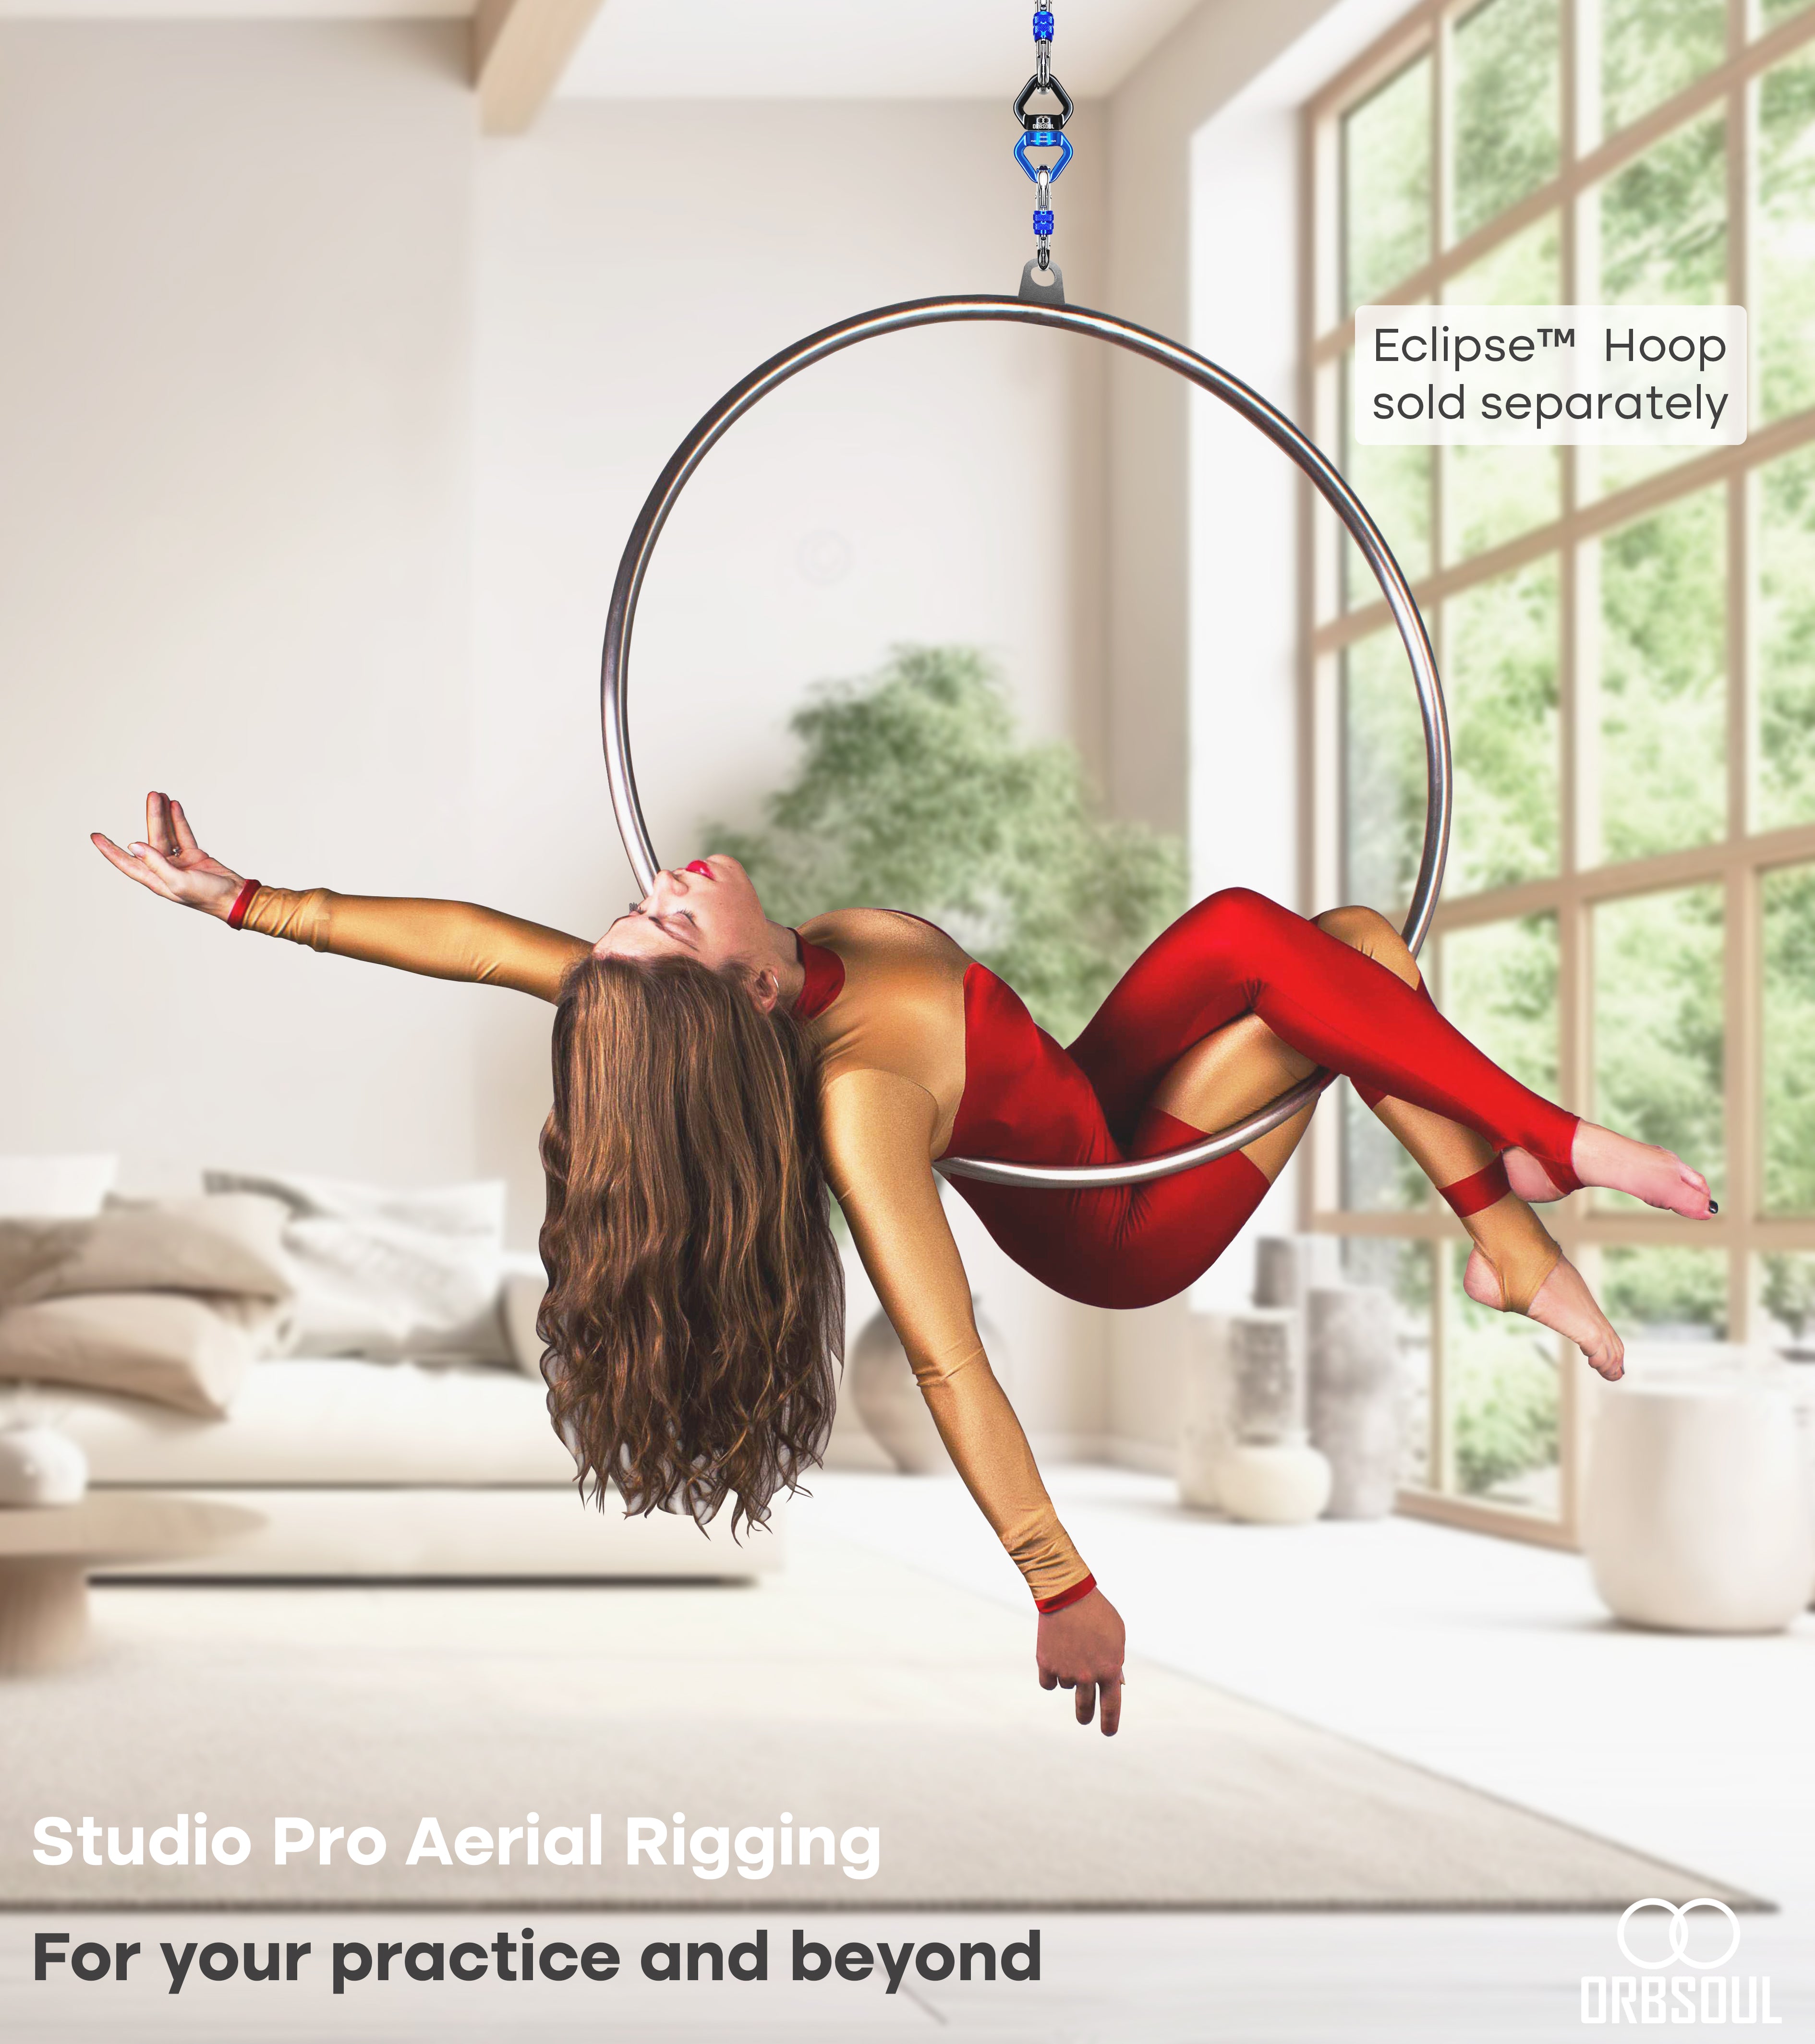 Orbsoul Studio pro aerial rigging set. For you practice and beyond. Girl sitting on hoop rigged using Studio pro rigging hardware.